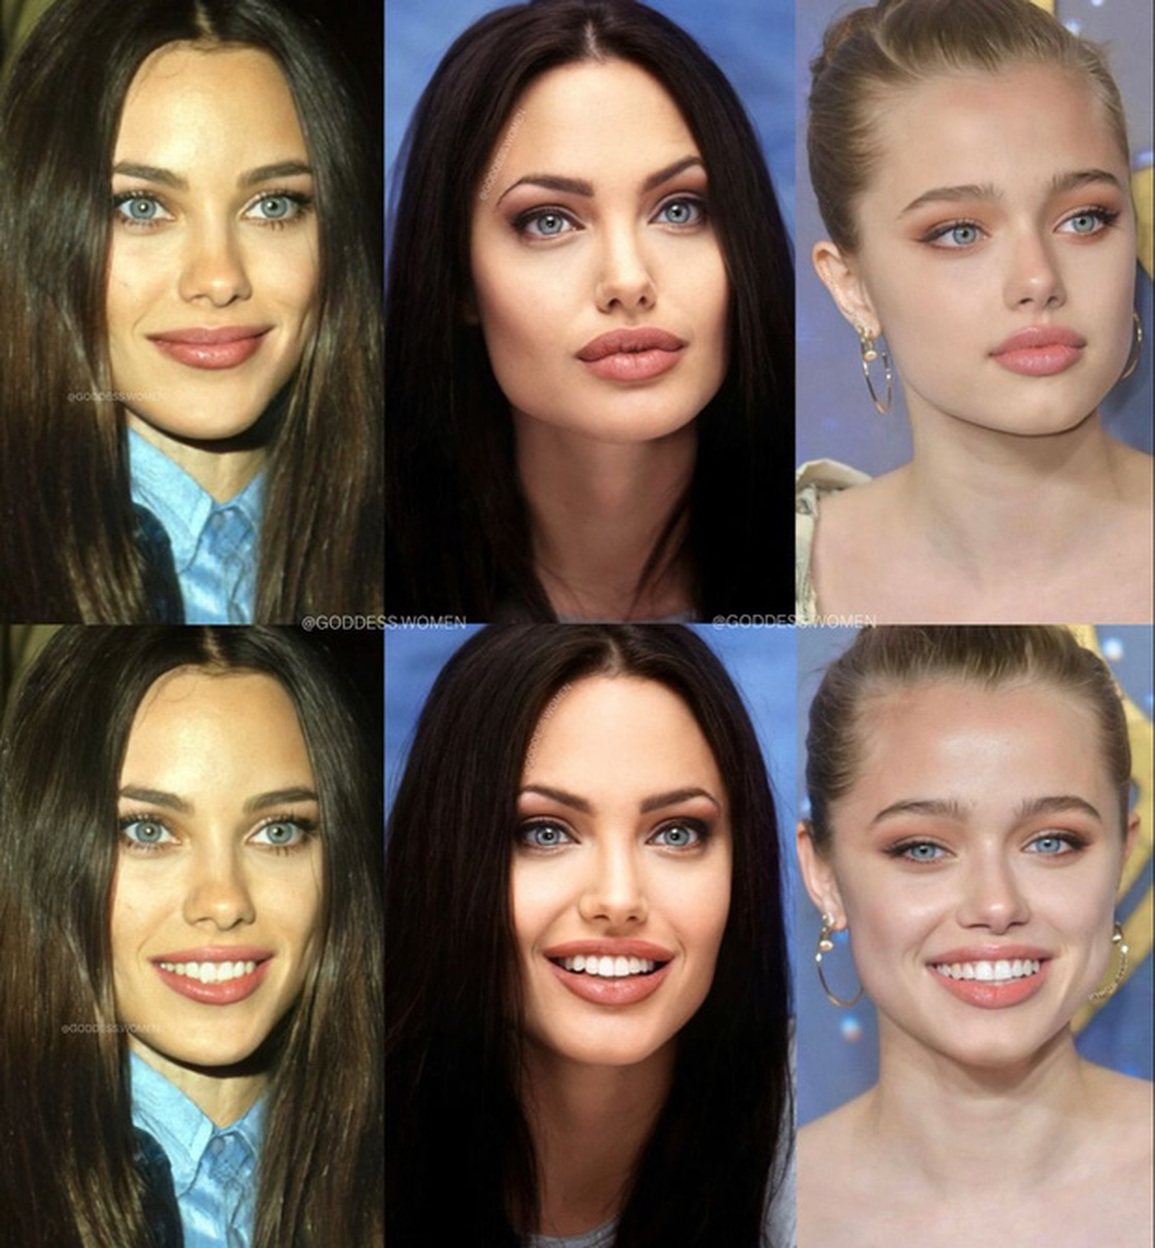 Admiring the outstanding beauty of three generations of Angelina Jolie - 1